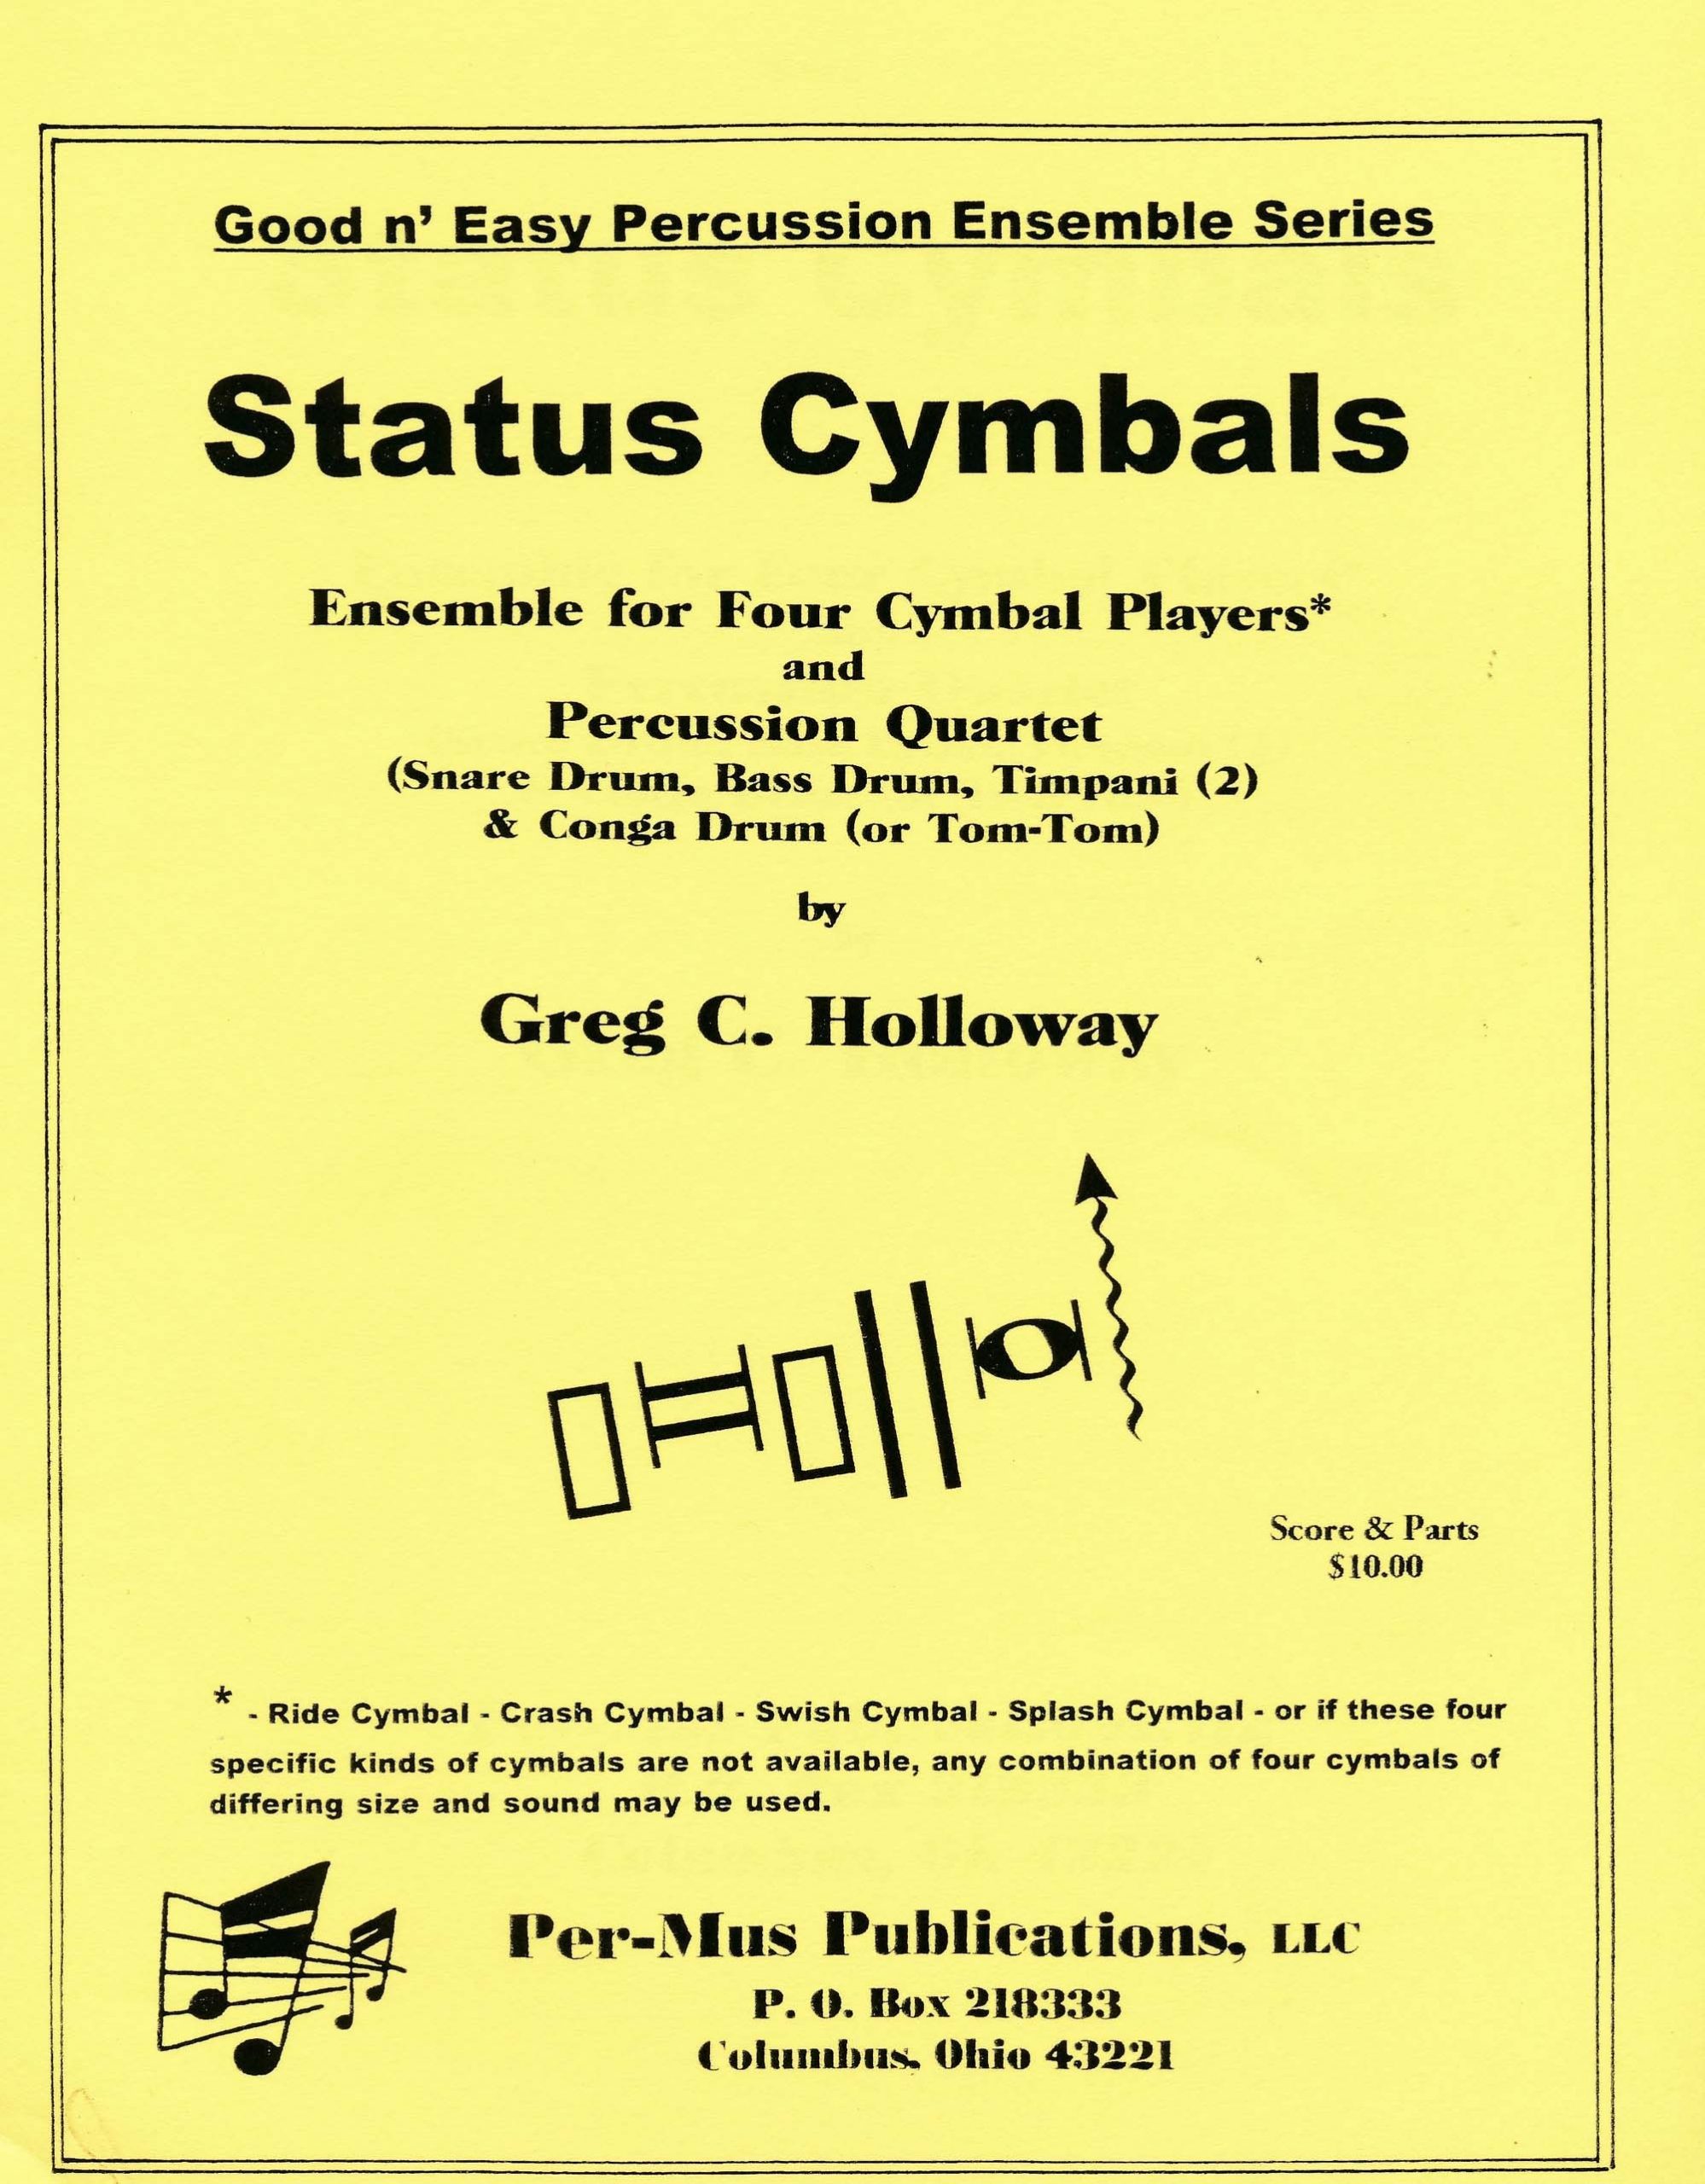 Status Cymbals by Greg Holloway